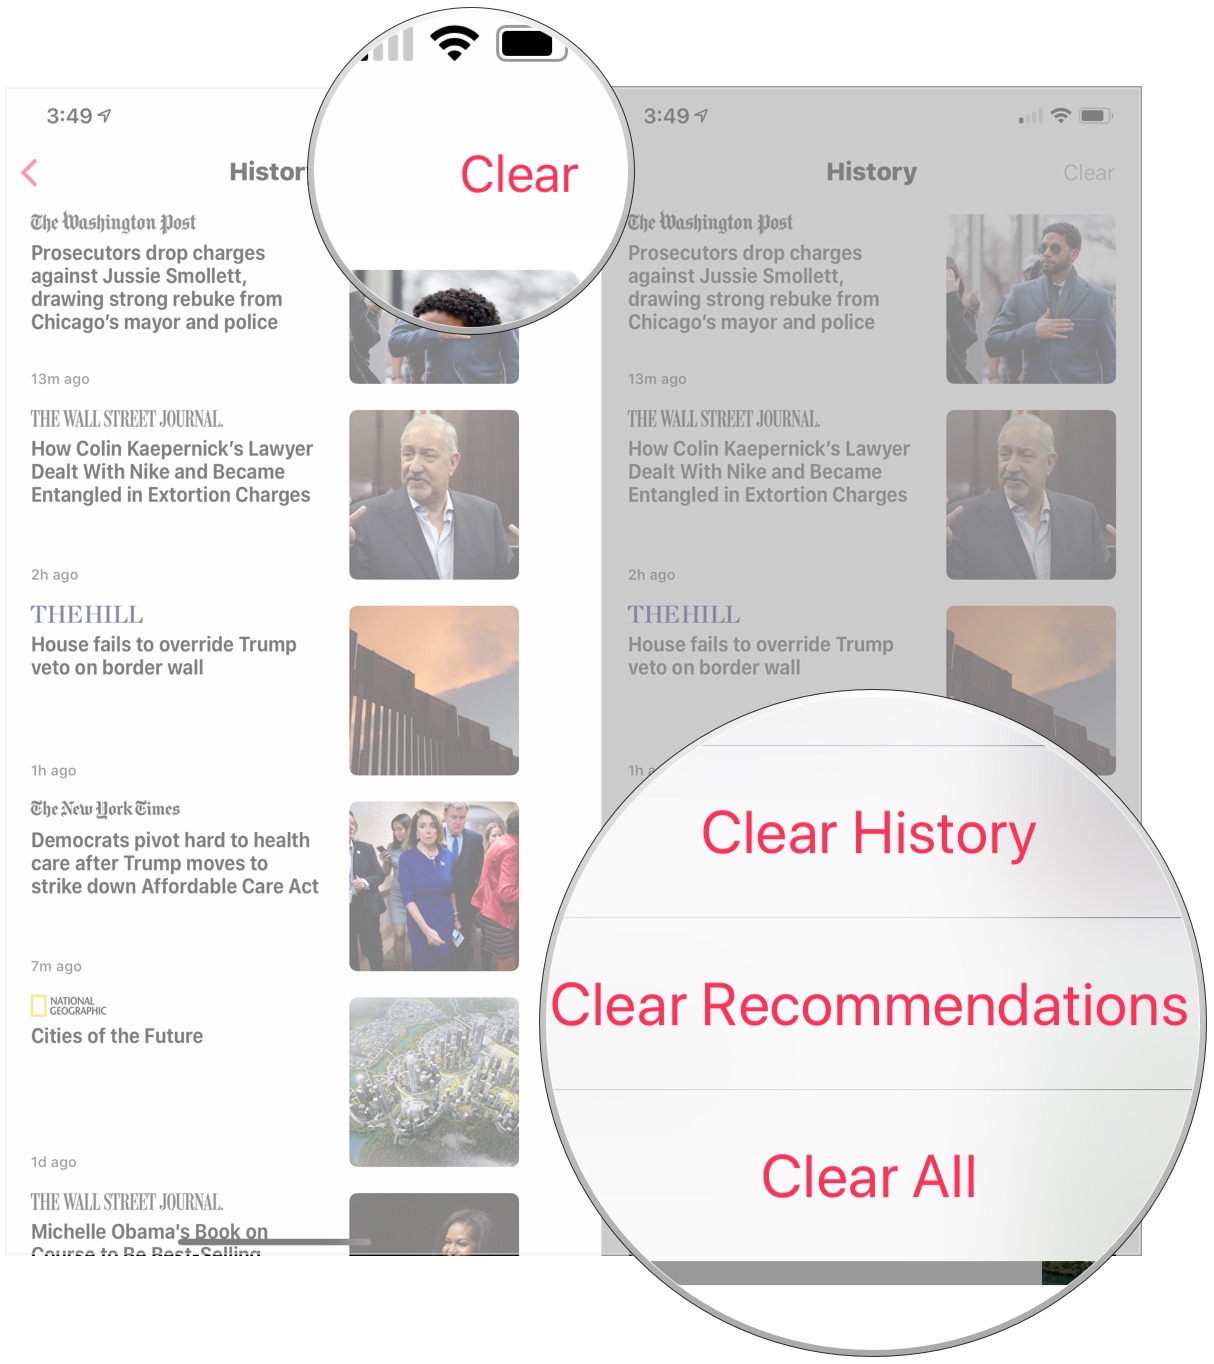 Tap Clear, tap Clear History, Clear Recommendations, or Clear All